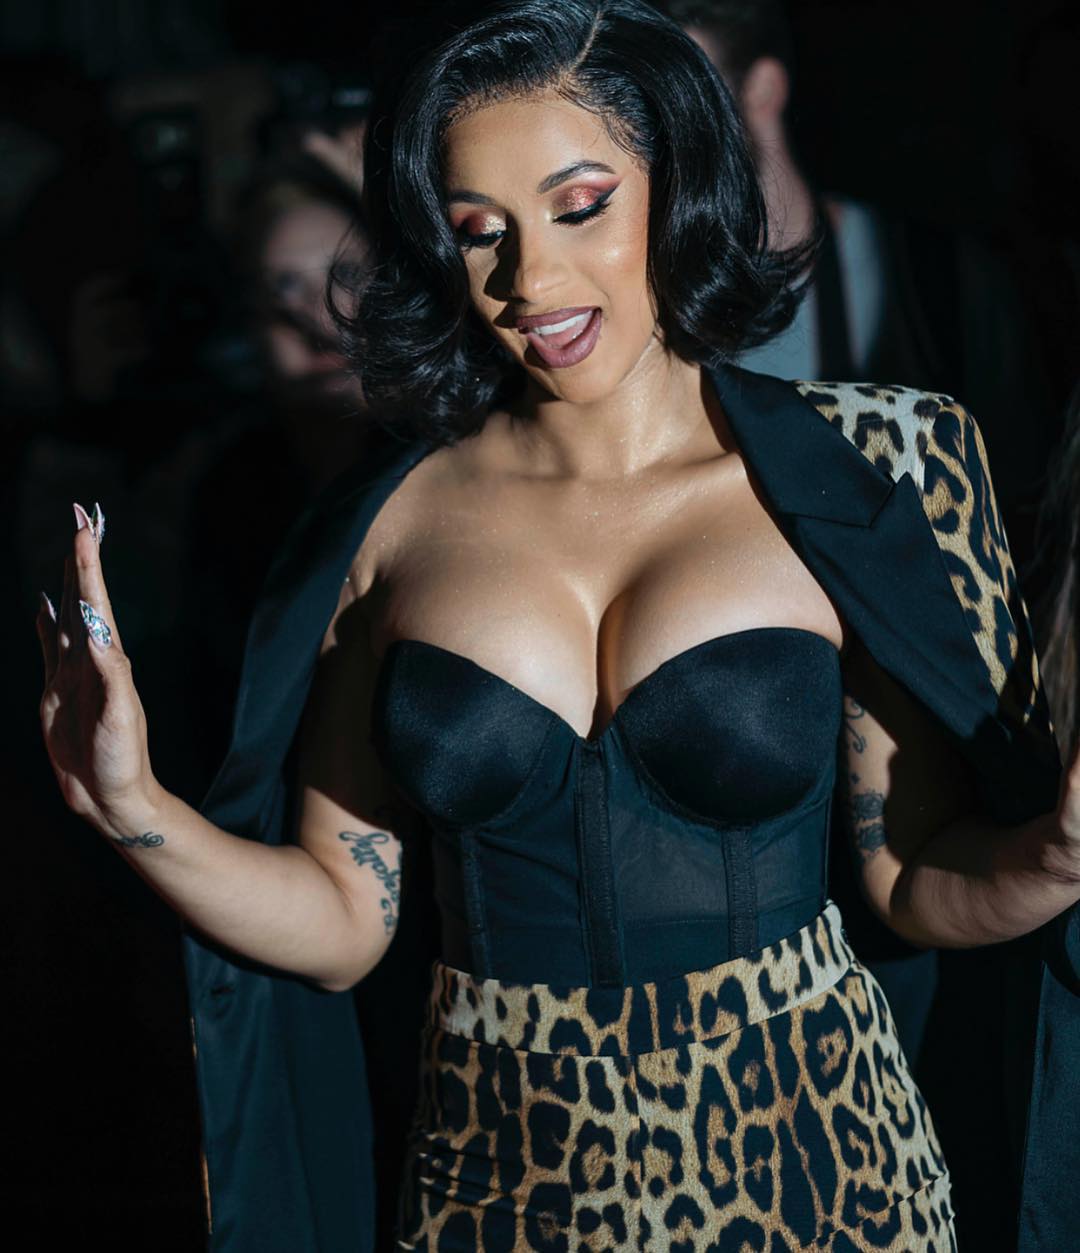 Cardi B Reveals She’s Getting New Breast Implants Following Her Pregnancy